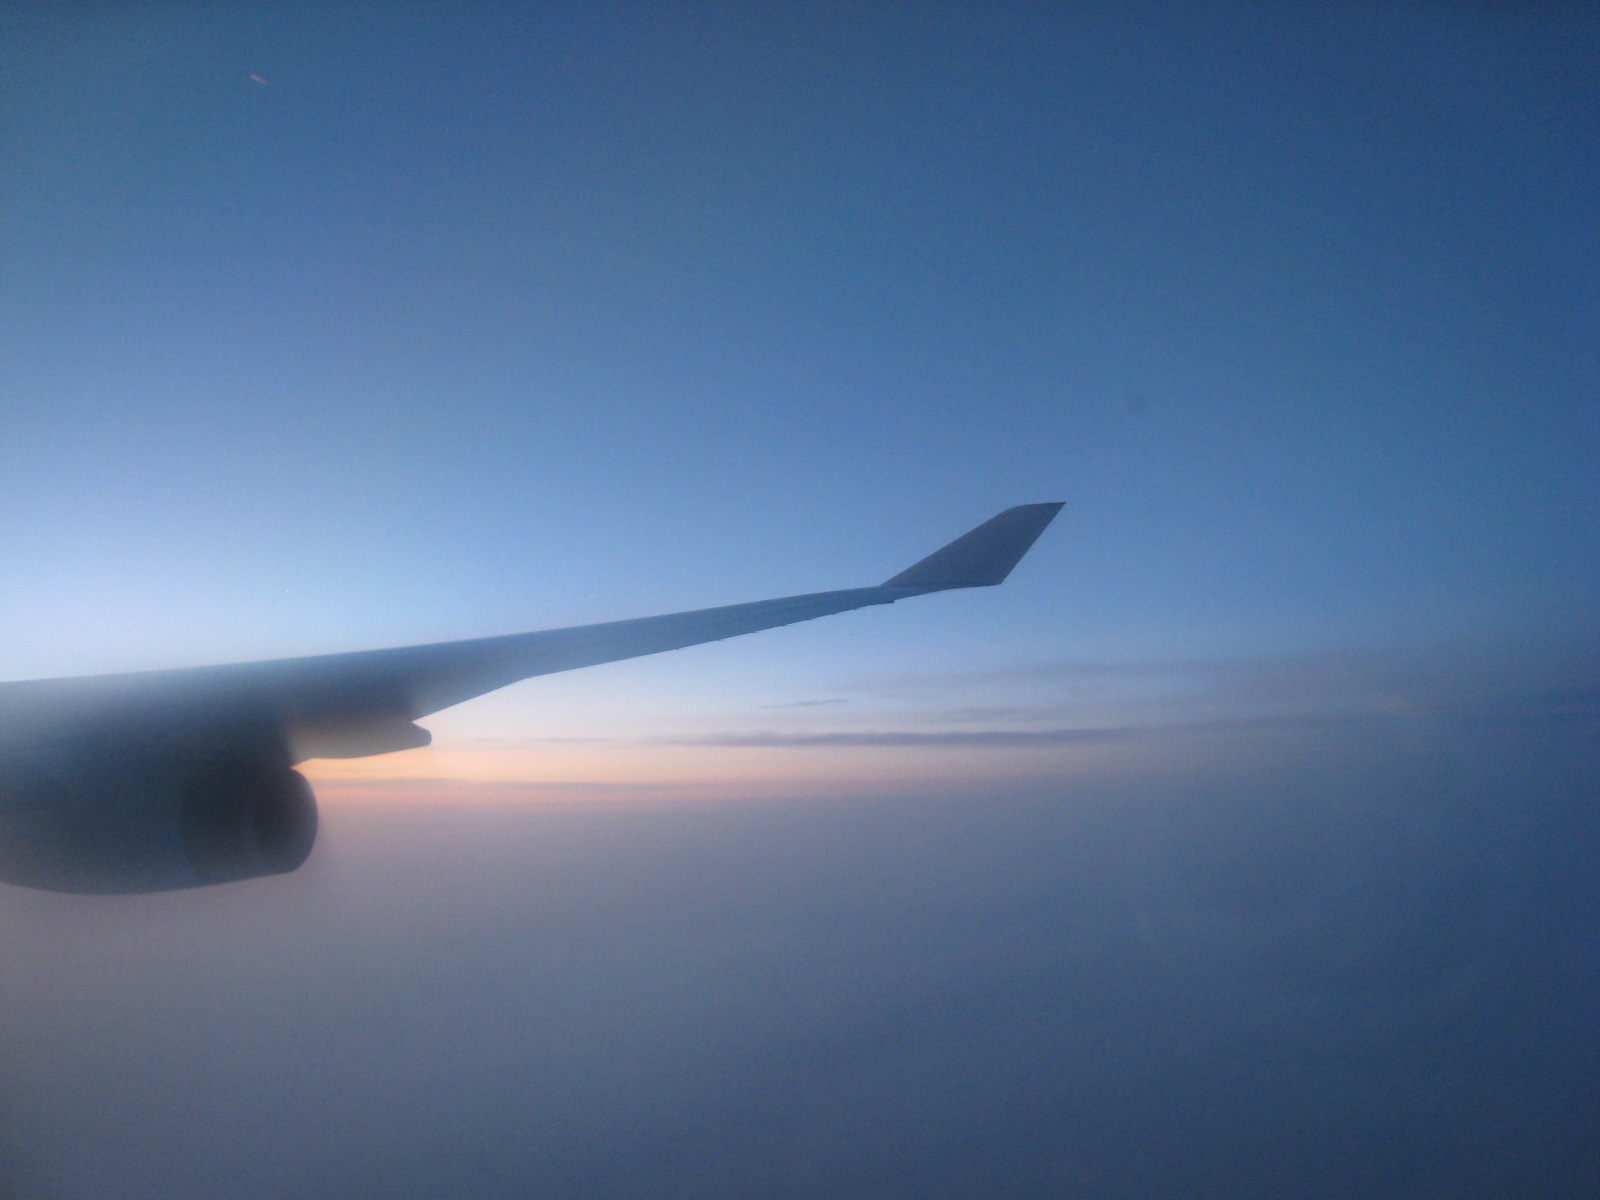 the wing of a plane flying over the ocean